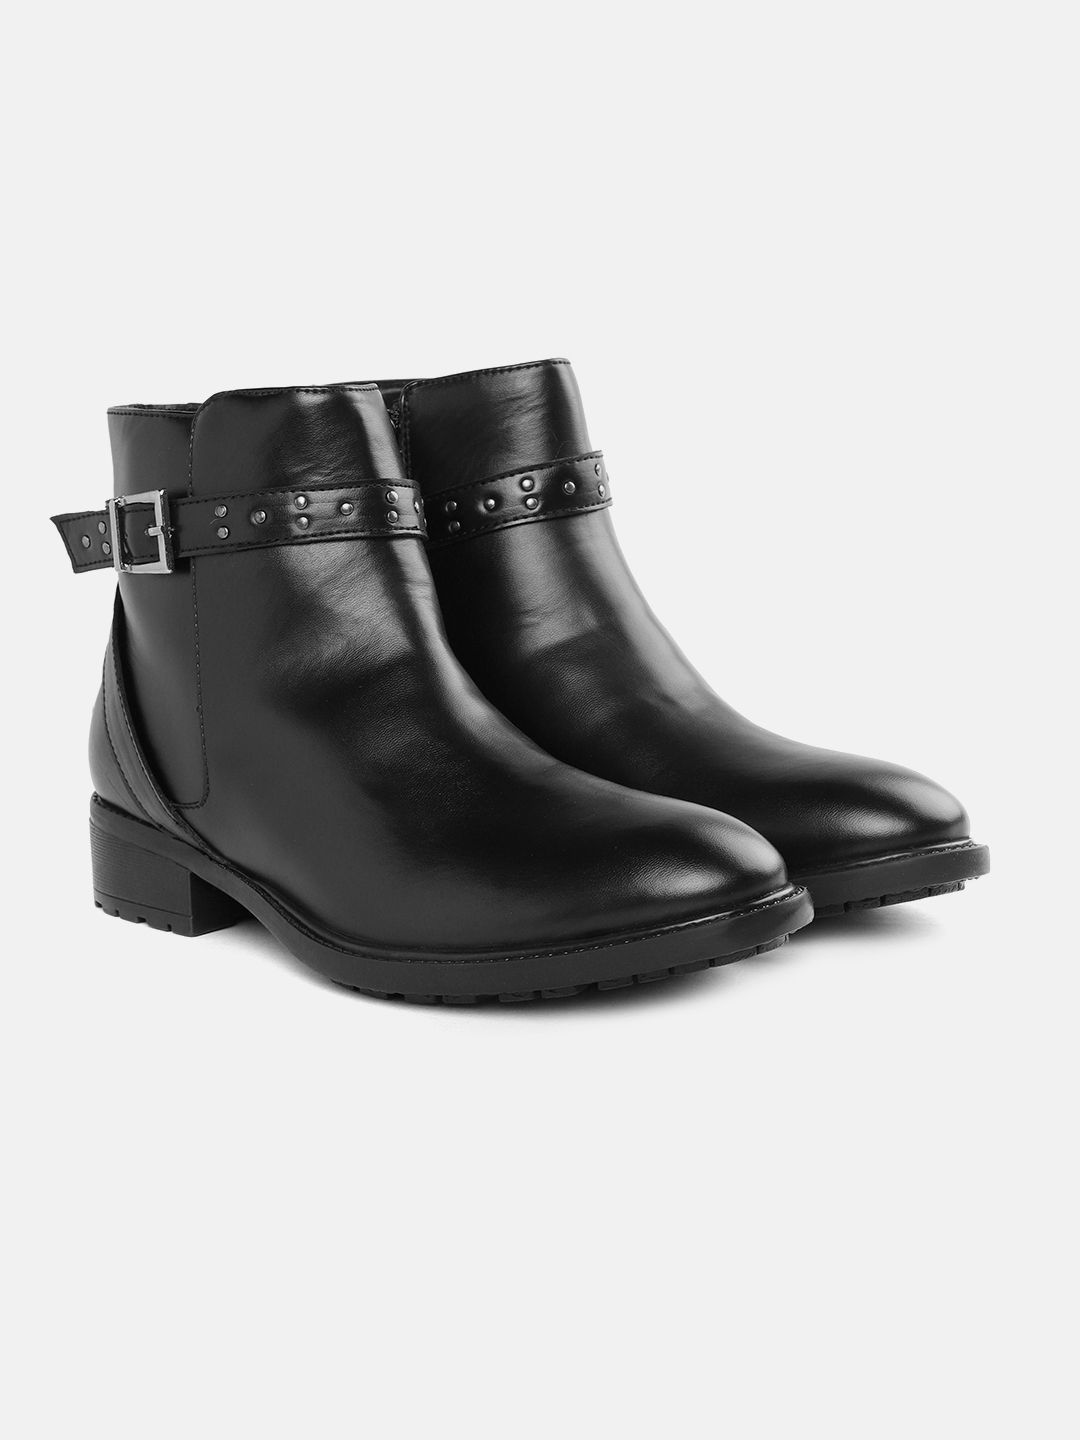 DressBerry Women Black Solid Mid-Top Flat Boots with Buckle & Studded Detail Price in India